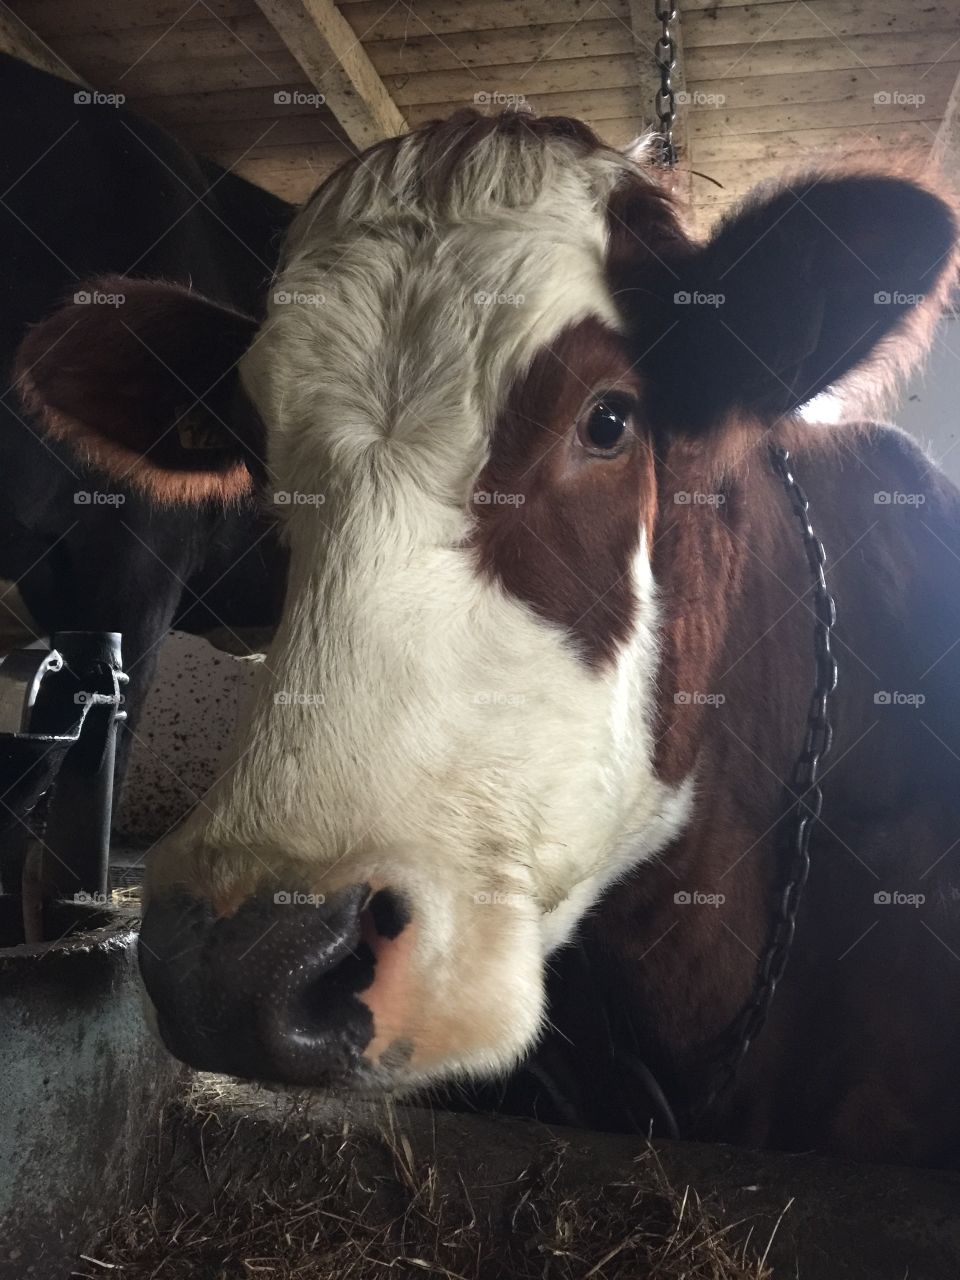 My favourite cow